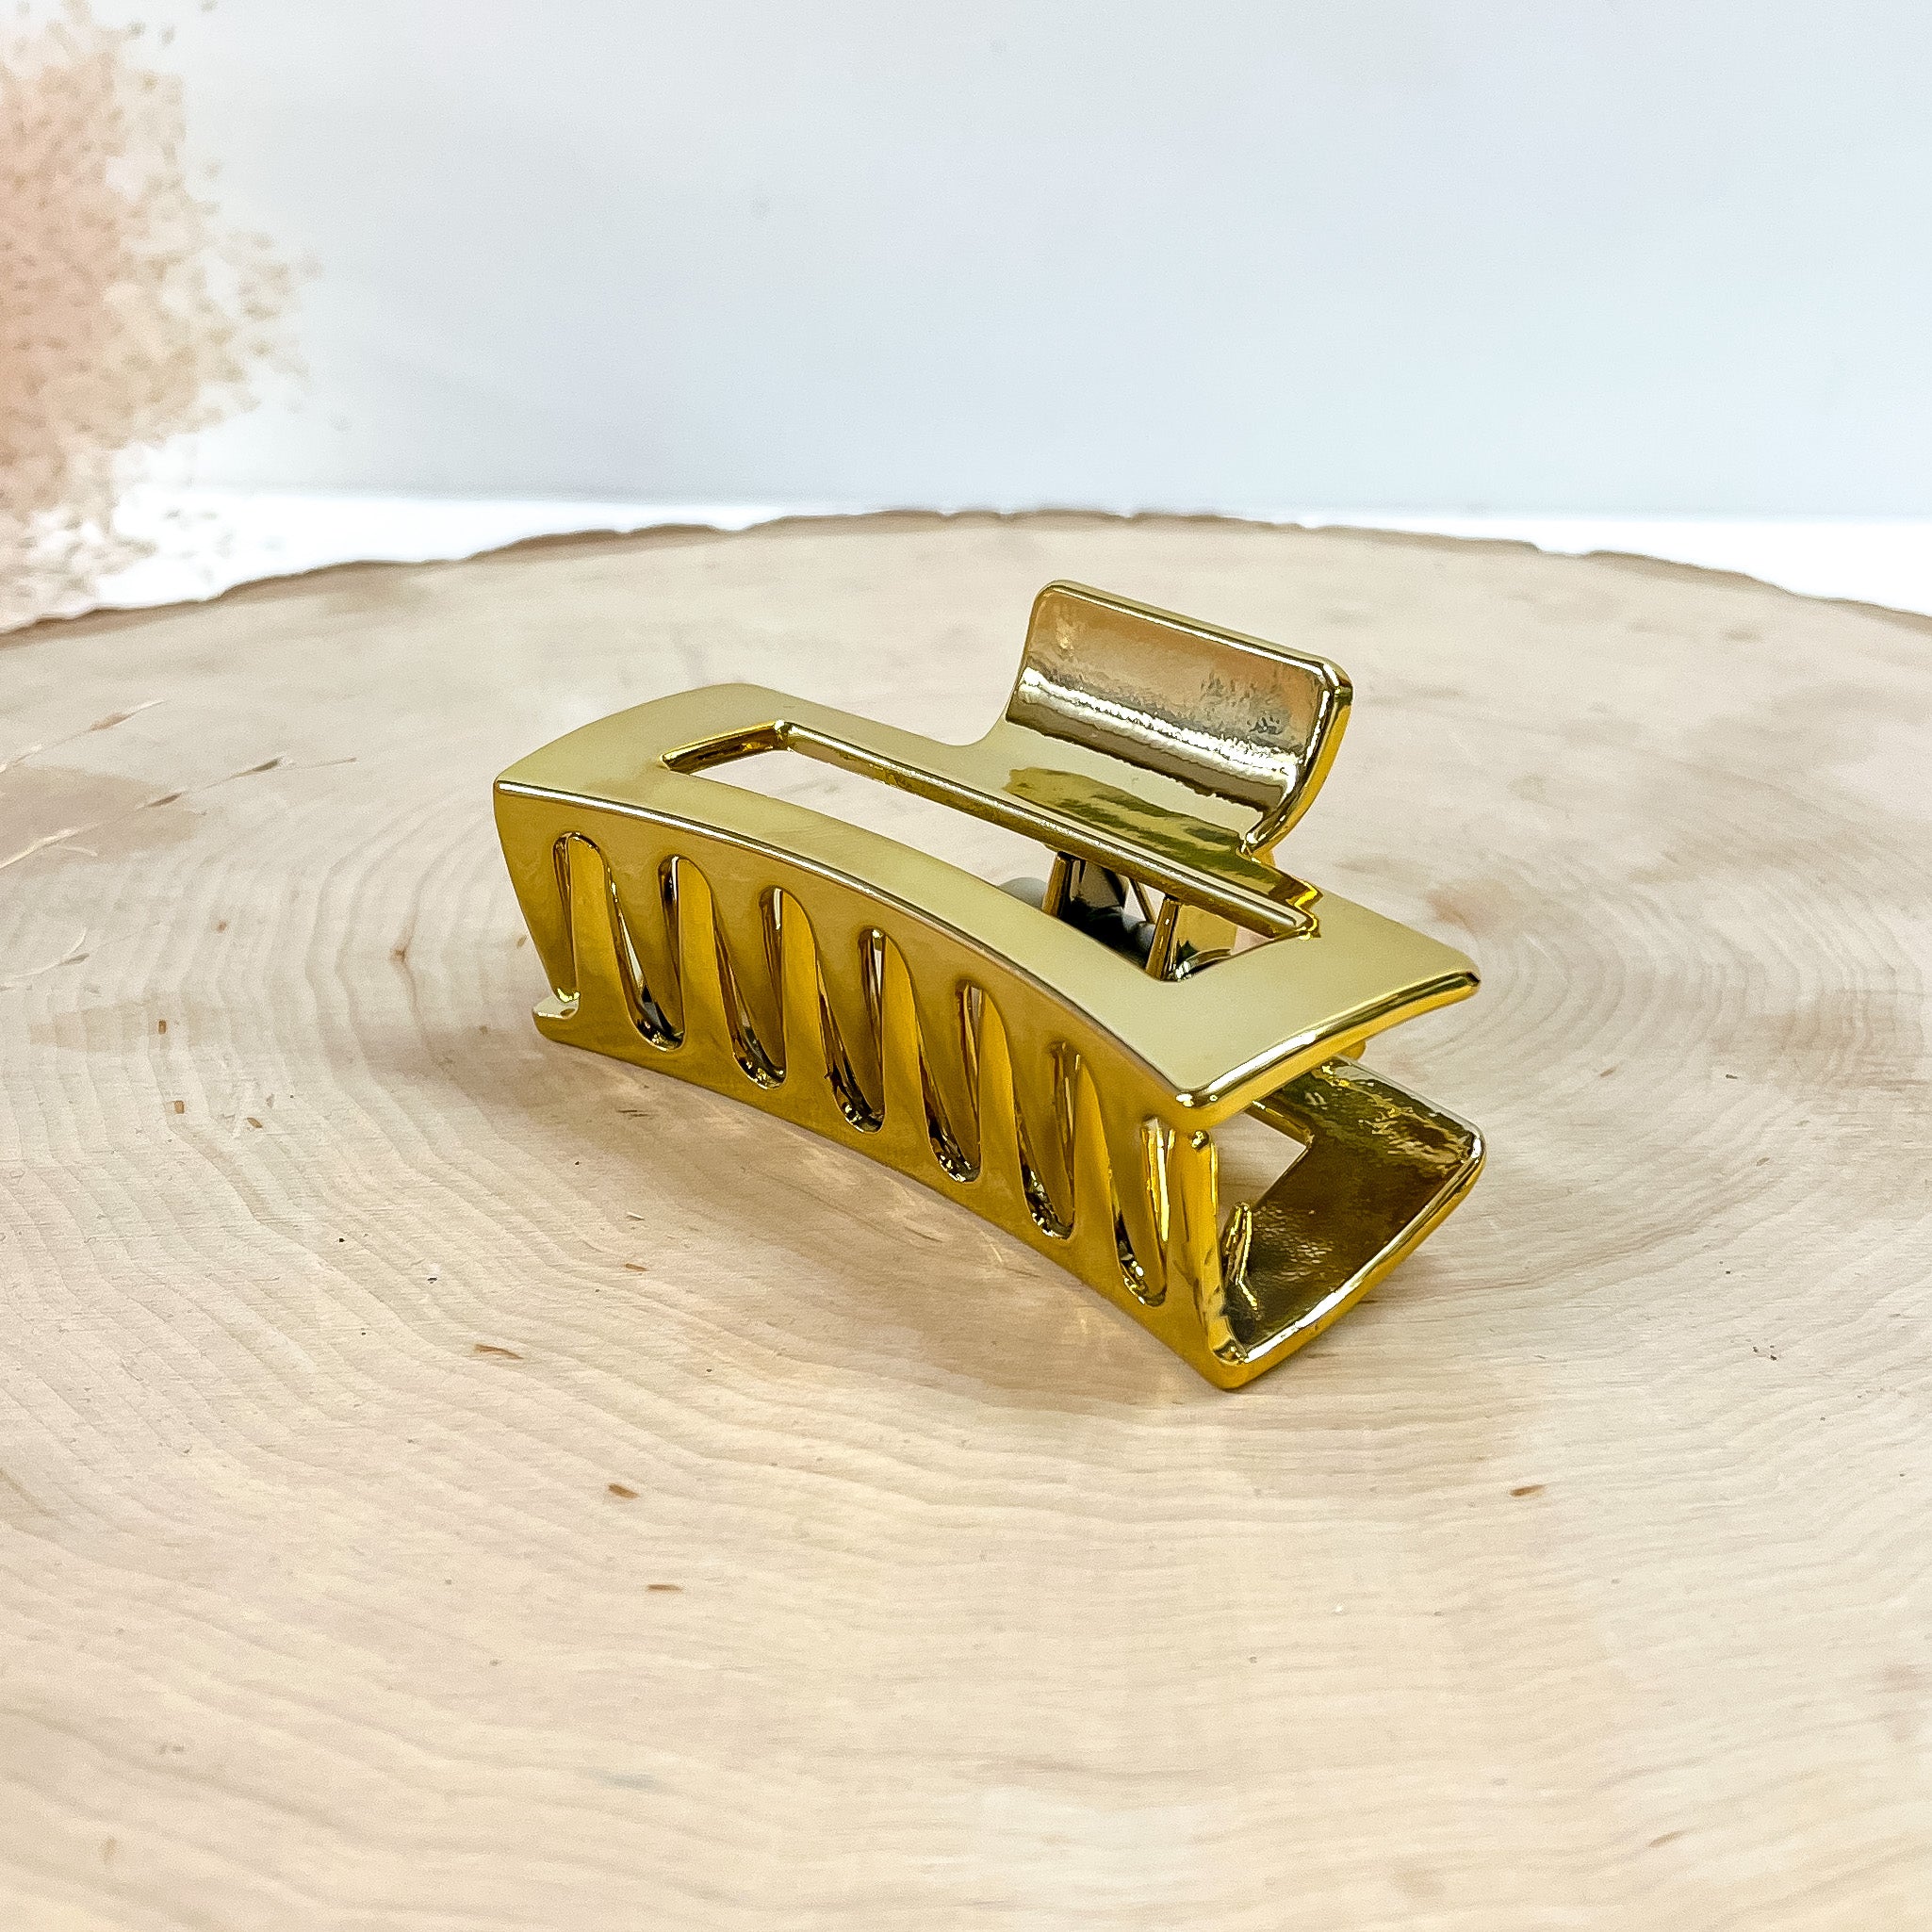 This is a rectangle metallic hair clip in gold, this clip is taken on a  slab of wood and in white background with a plant in the side as decor.